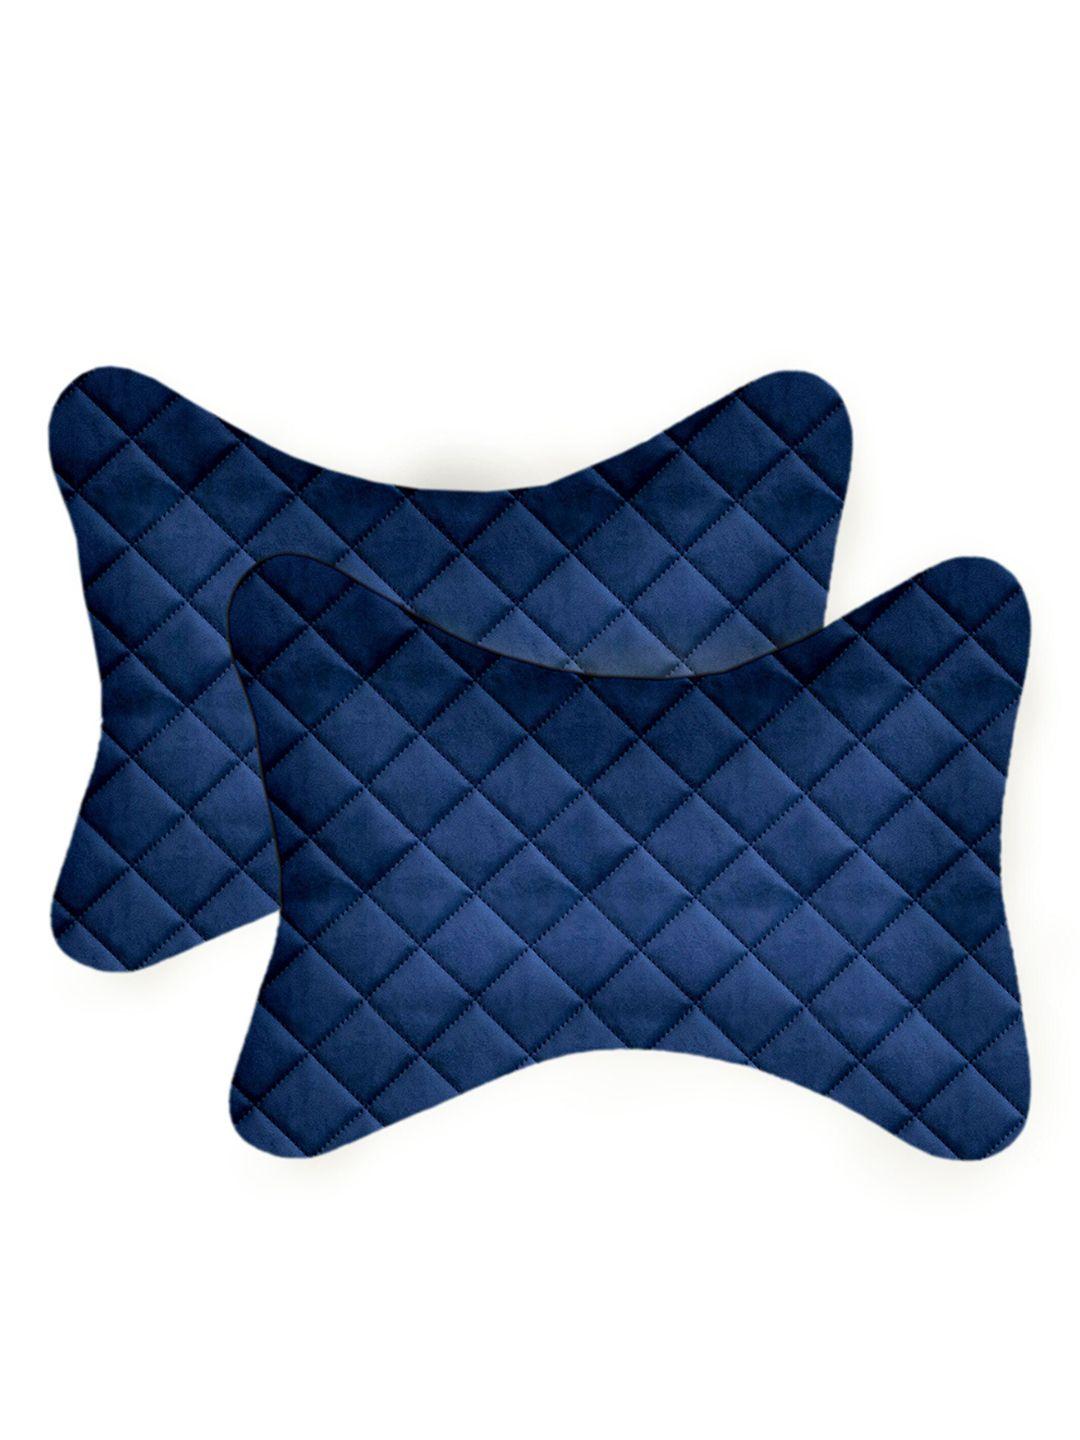 lushomes pack of 2 blue textured travel car neck rest pillow